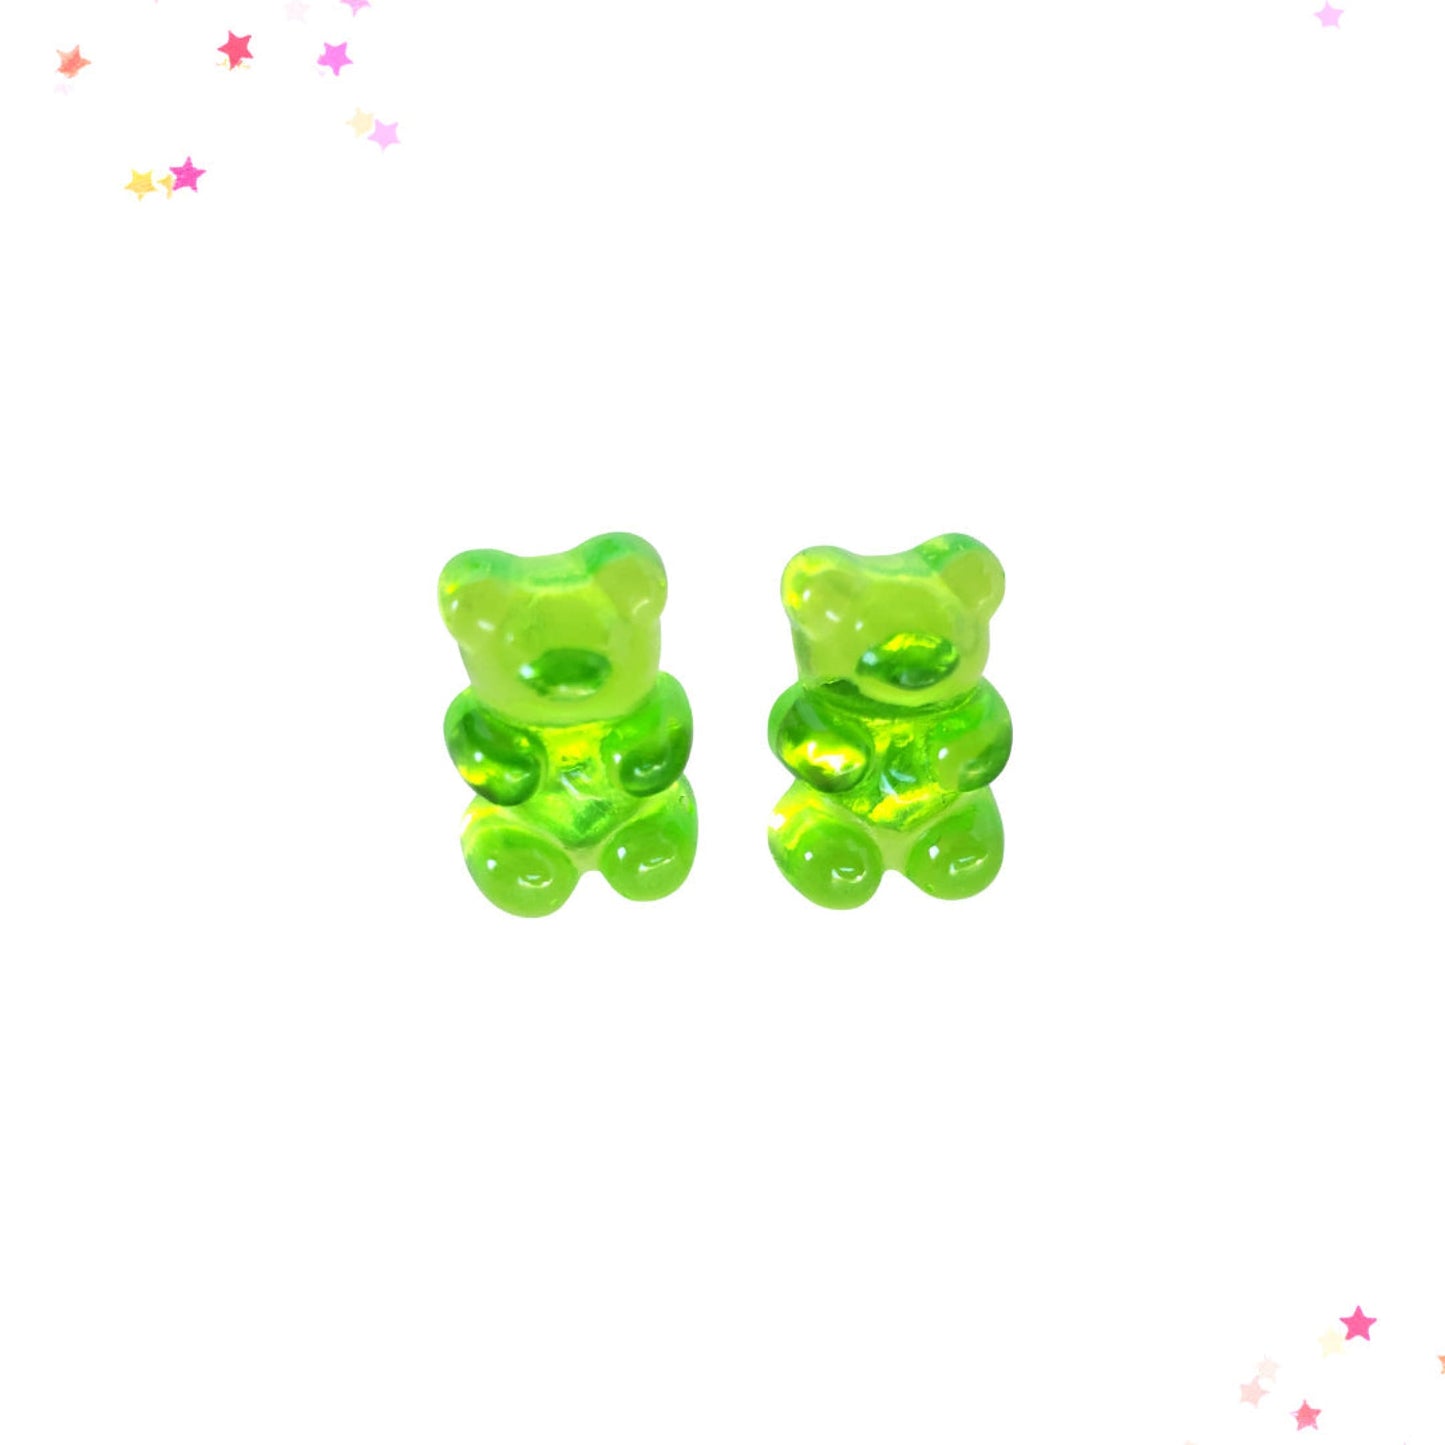 Gummy Bear Post Earrings in Lime from Confetti Kitty, Only 3.99